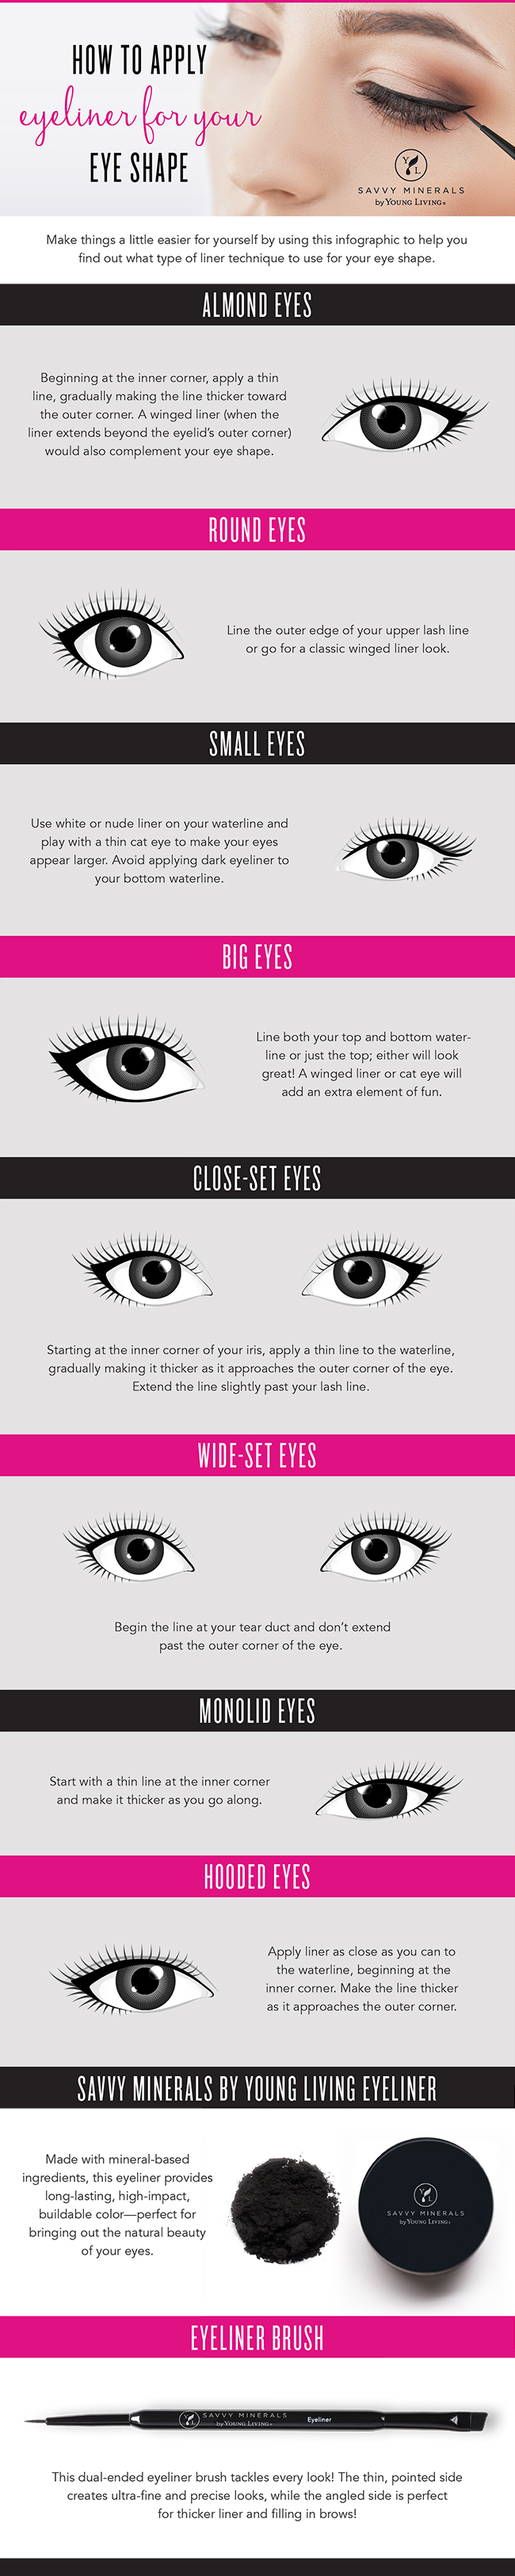 How to apply eyeliner for your eye shape Young Living Savvy Minerals